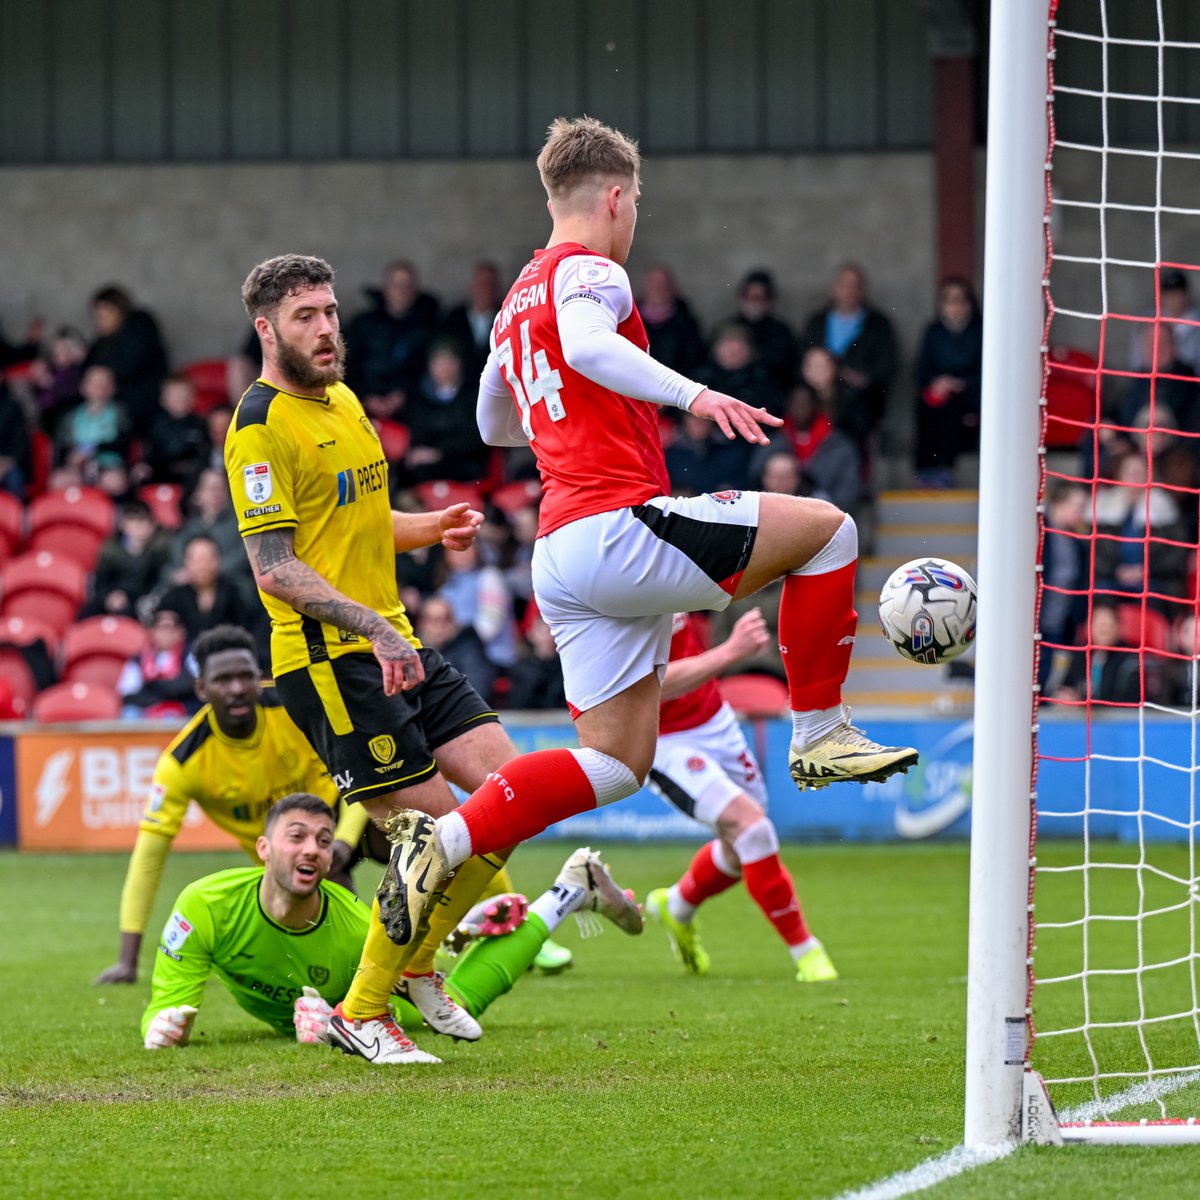 Good morning to the Cod Army! 👋 We've been thinking...did Tommy Lonergan get a touch on the ball before it went over the line? Let us know below ⤵️ #OnwardTogether